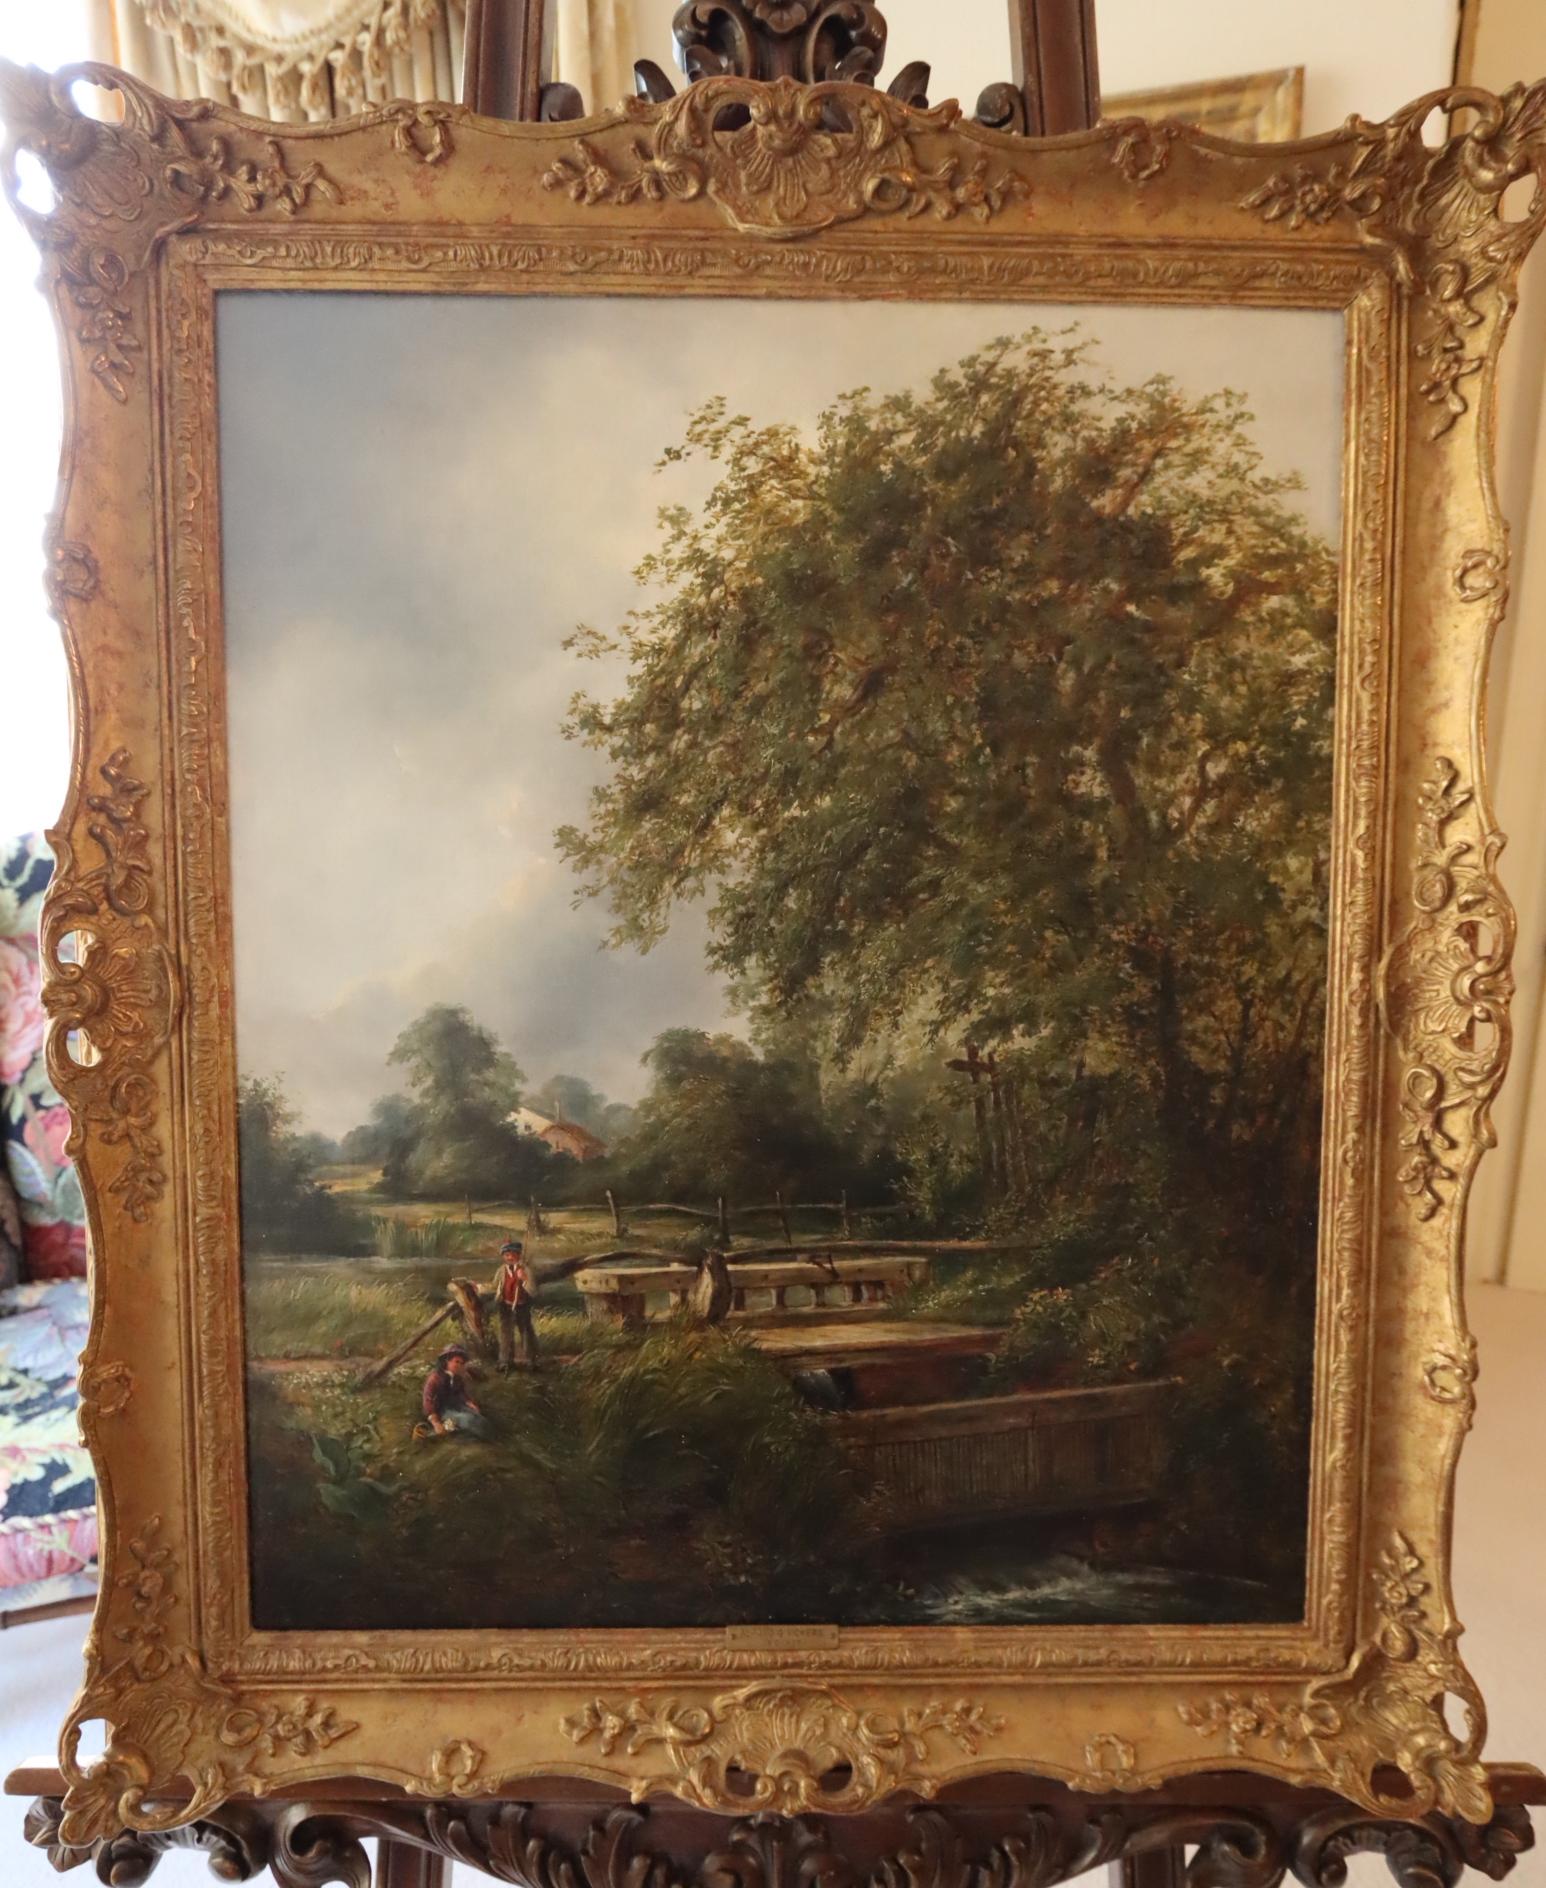 Beautiful Landscape depicting children playing by a river on a warm summers day. Painted by Alfred G Vickers. Oil on Canvas, 30” x 35.5” framed. 

Alfred G Vickers was born in Lambeth in 1810 and died in 1837, he took inspiration in the arts from